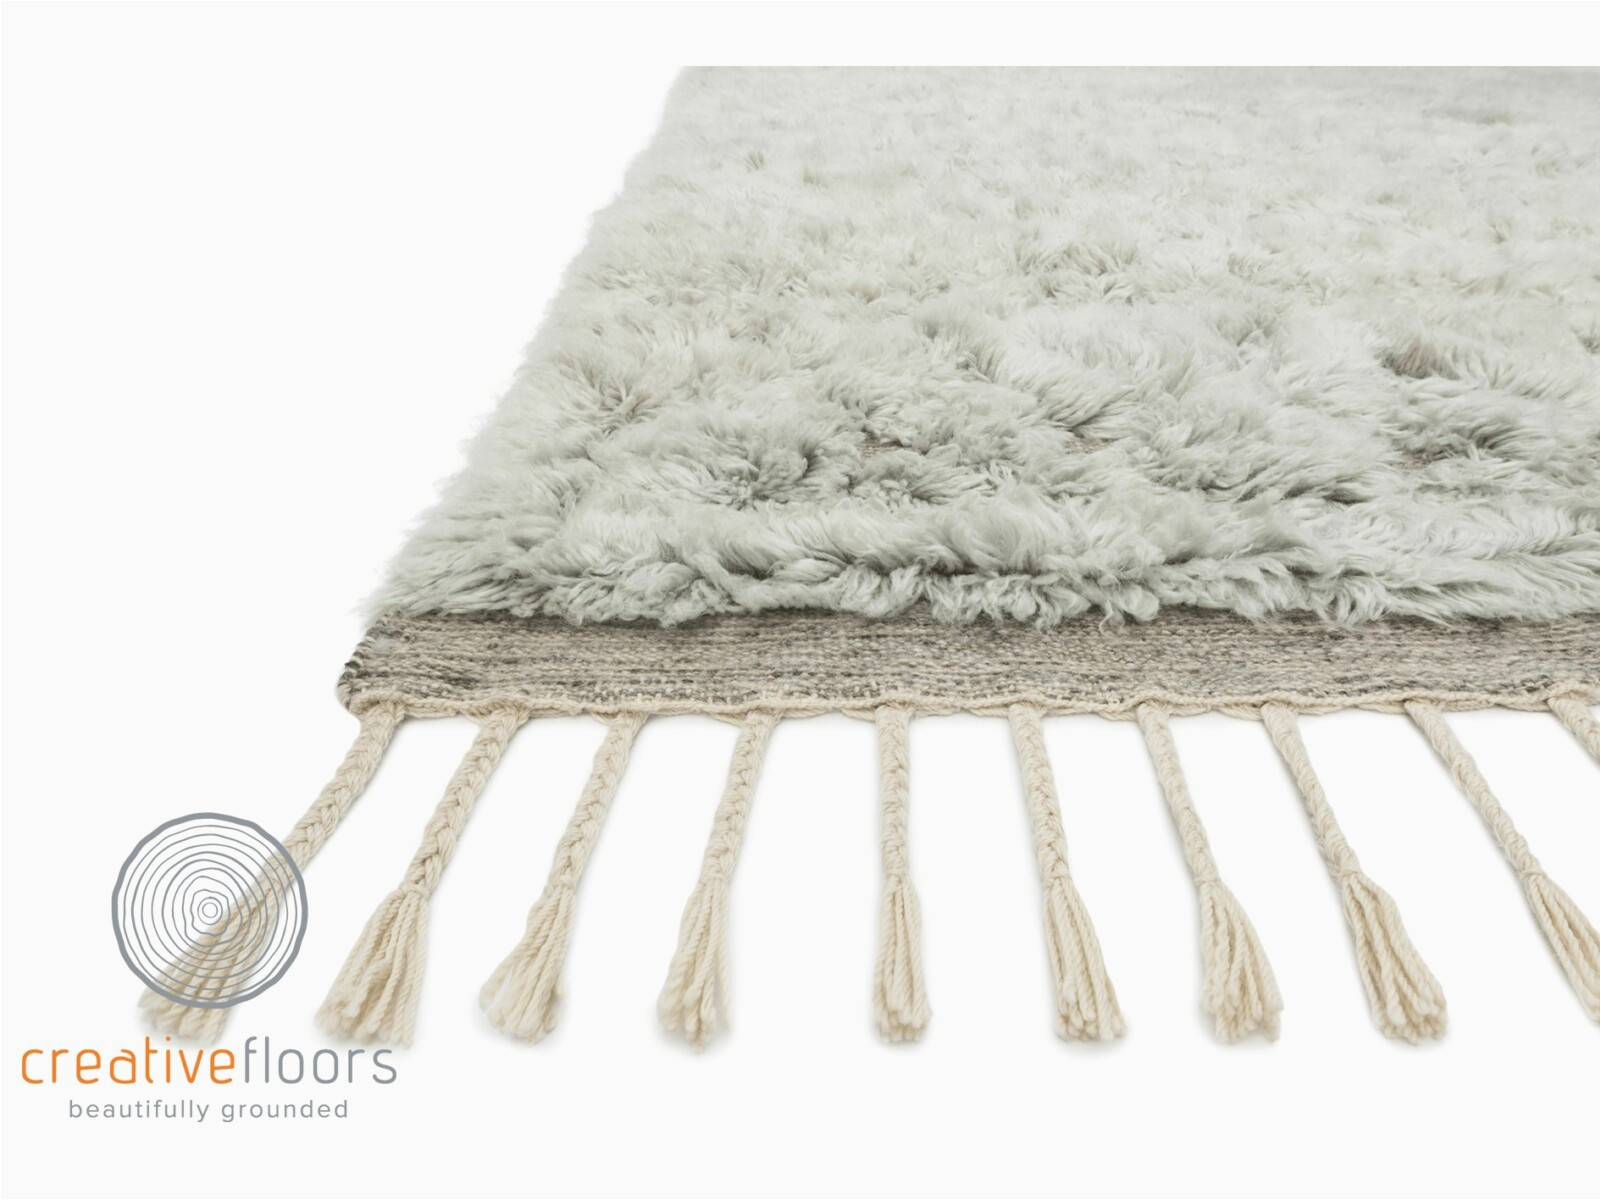 Best Fabric for area Rugs Best Materials for area Rugs In Your Work or Living Space